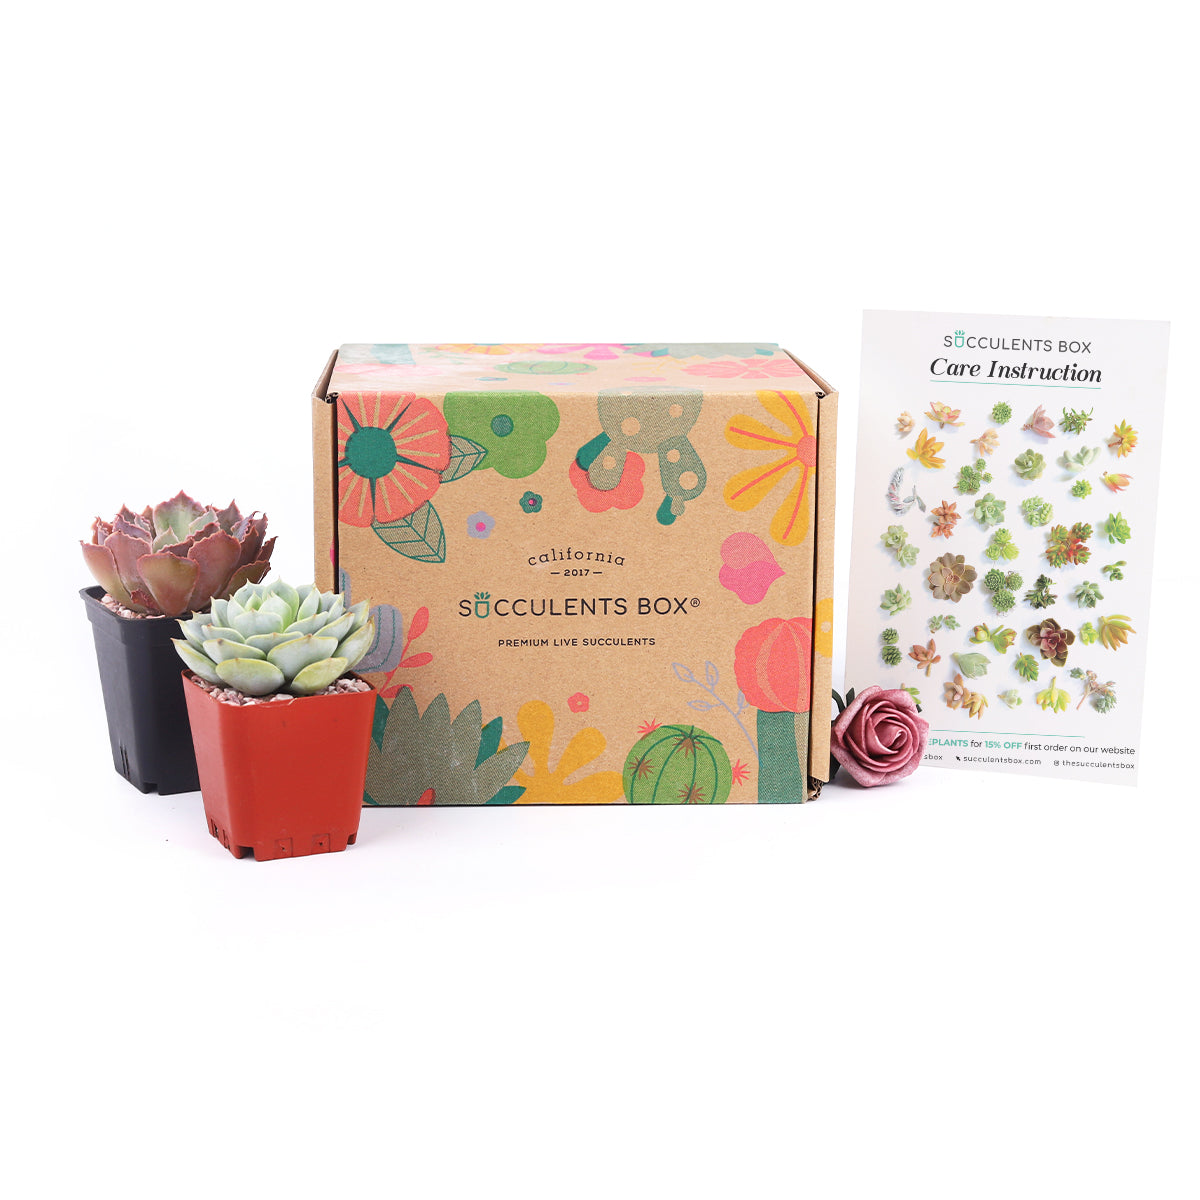 Subscription Box with Care Instruction, Succulent Subscription Box, Succulents Shop in California, Succulents and Cactus Plants, Succulent Gift Box Monthly, home decor subscription box, subscription box for women, customized subscription box, mystery box subscription, mother day gifts, mother's day subscription box, subscription boxes for mother's day